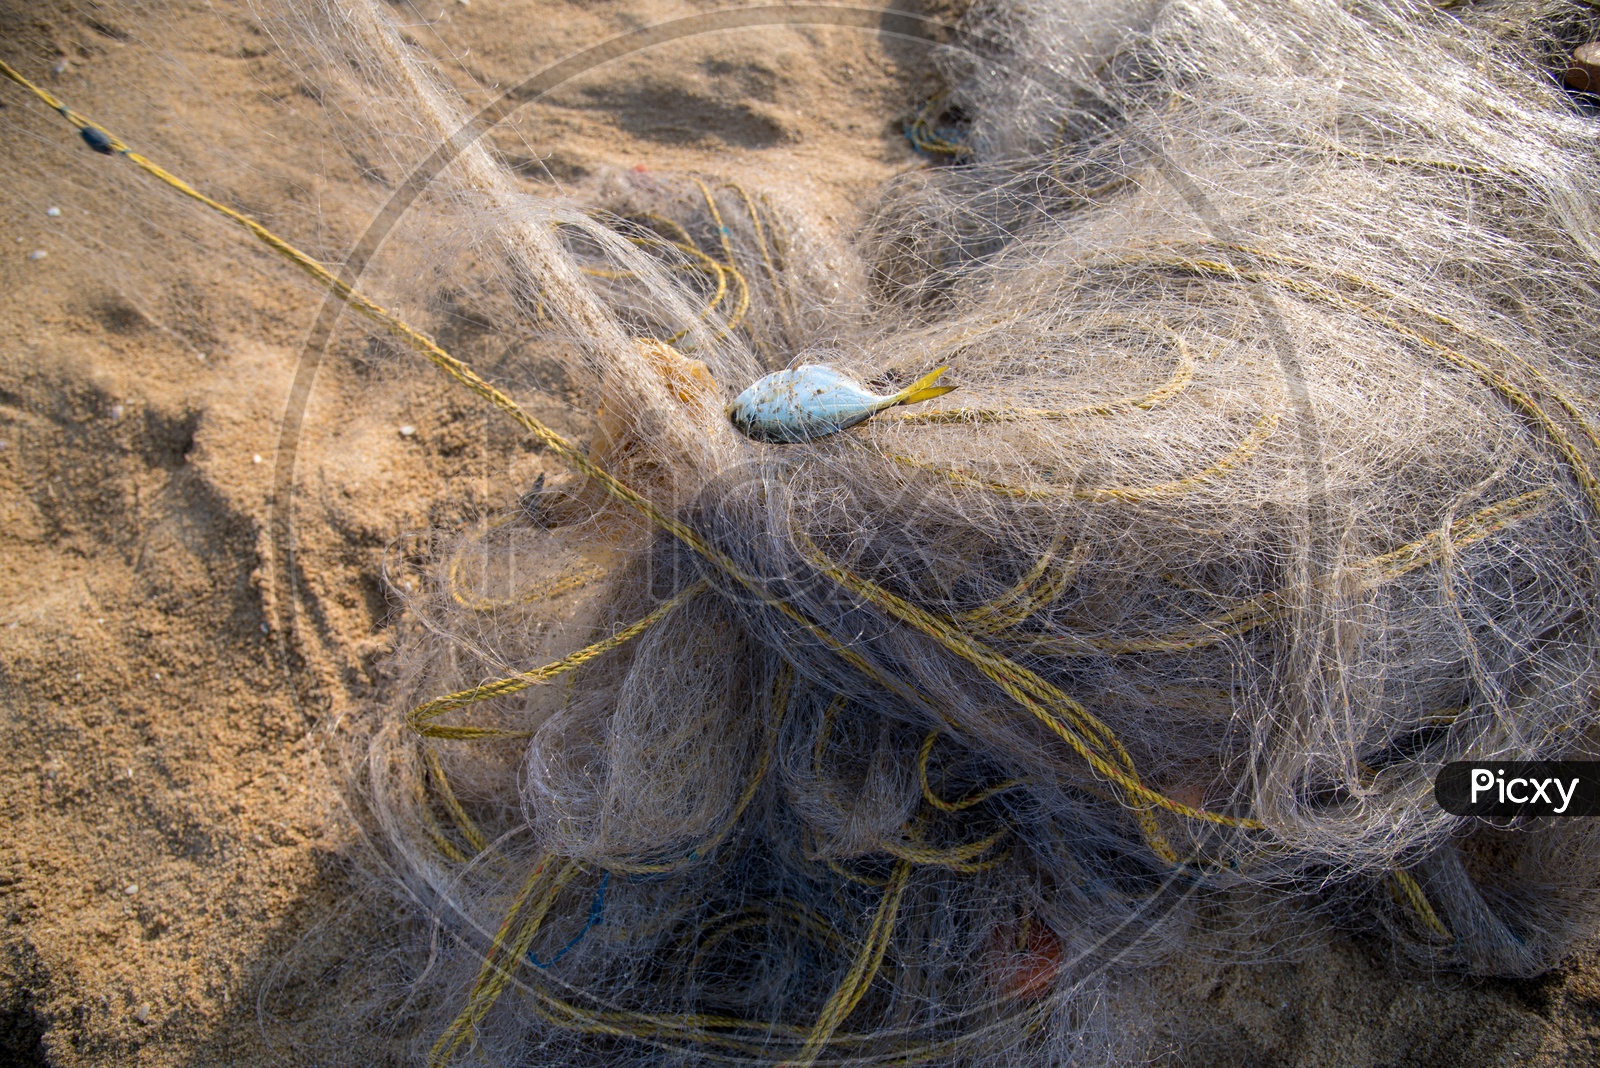 A fish stuck in the fishing net